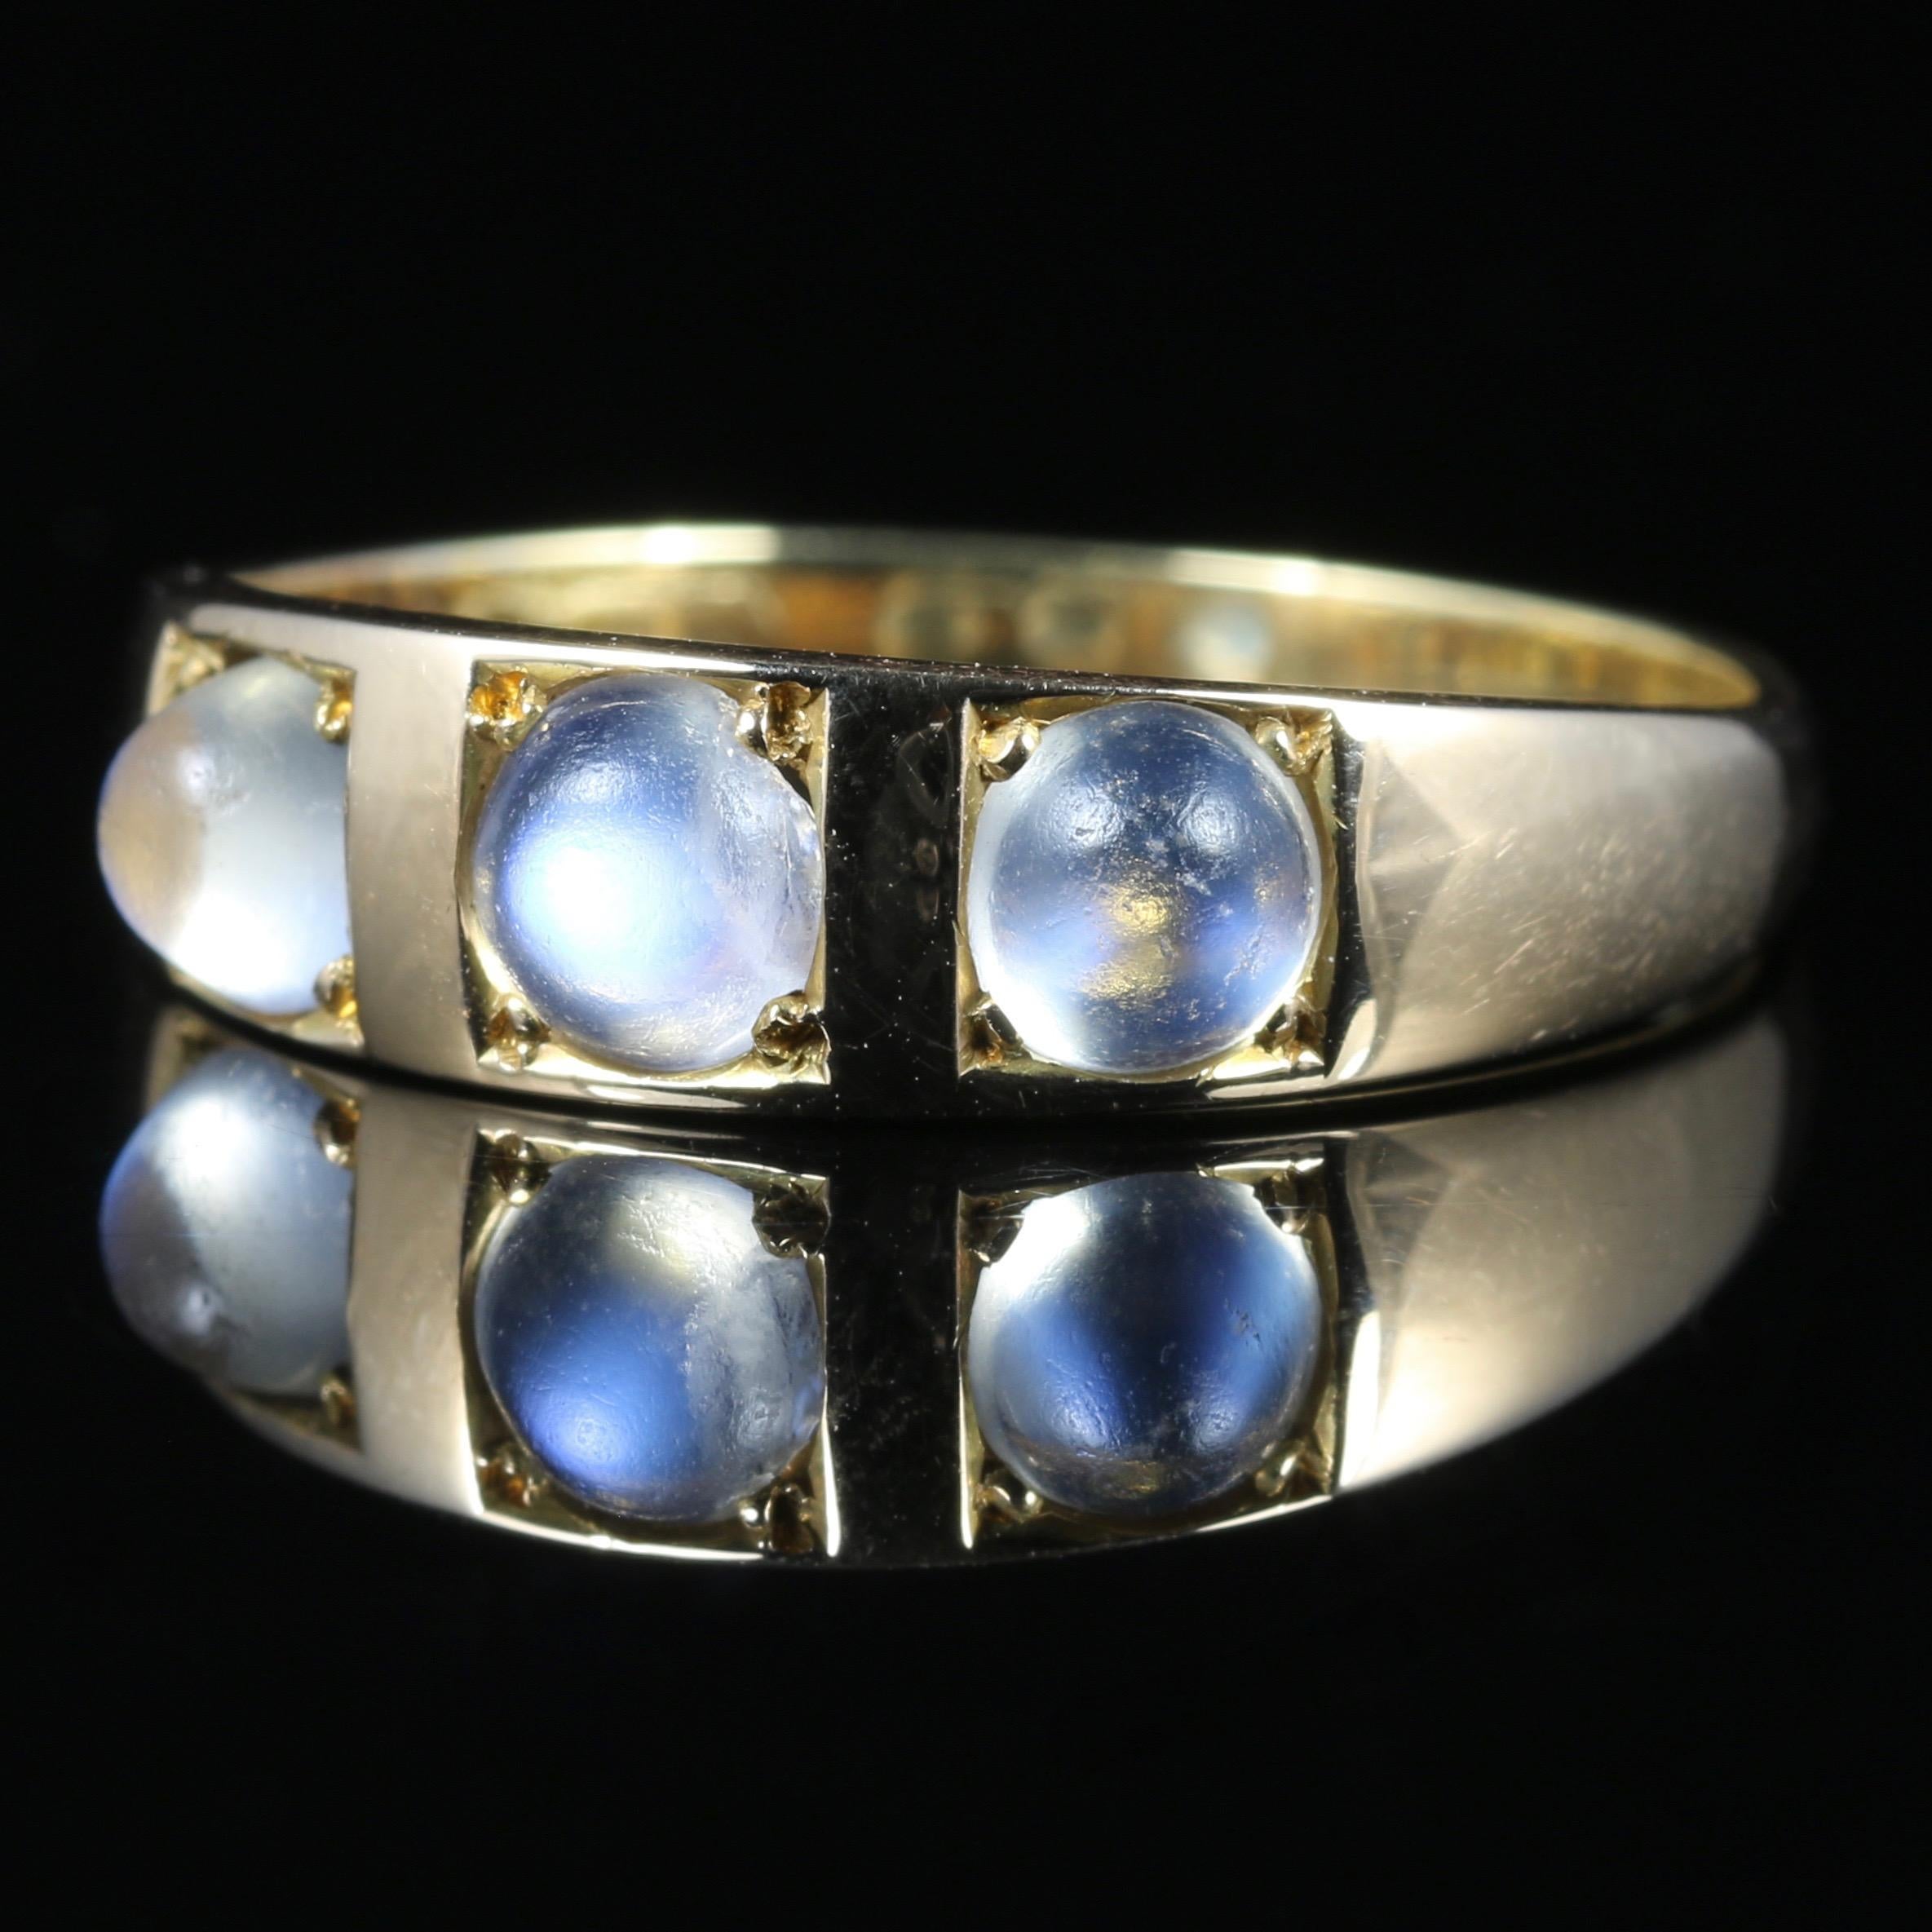 For more details please click continue reading down below...

This gorgeous, genuine, antique Victorian Moonstone trilogy ring is Circa 1880.

All set in 18ct Yellow Gold.

The fabulous ring displays three spectacular glowing Moonstones which are